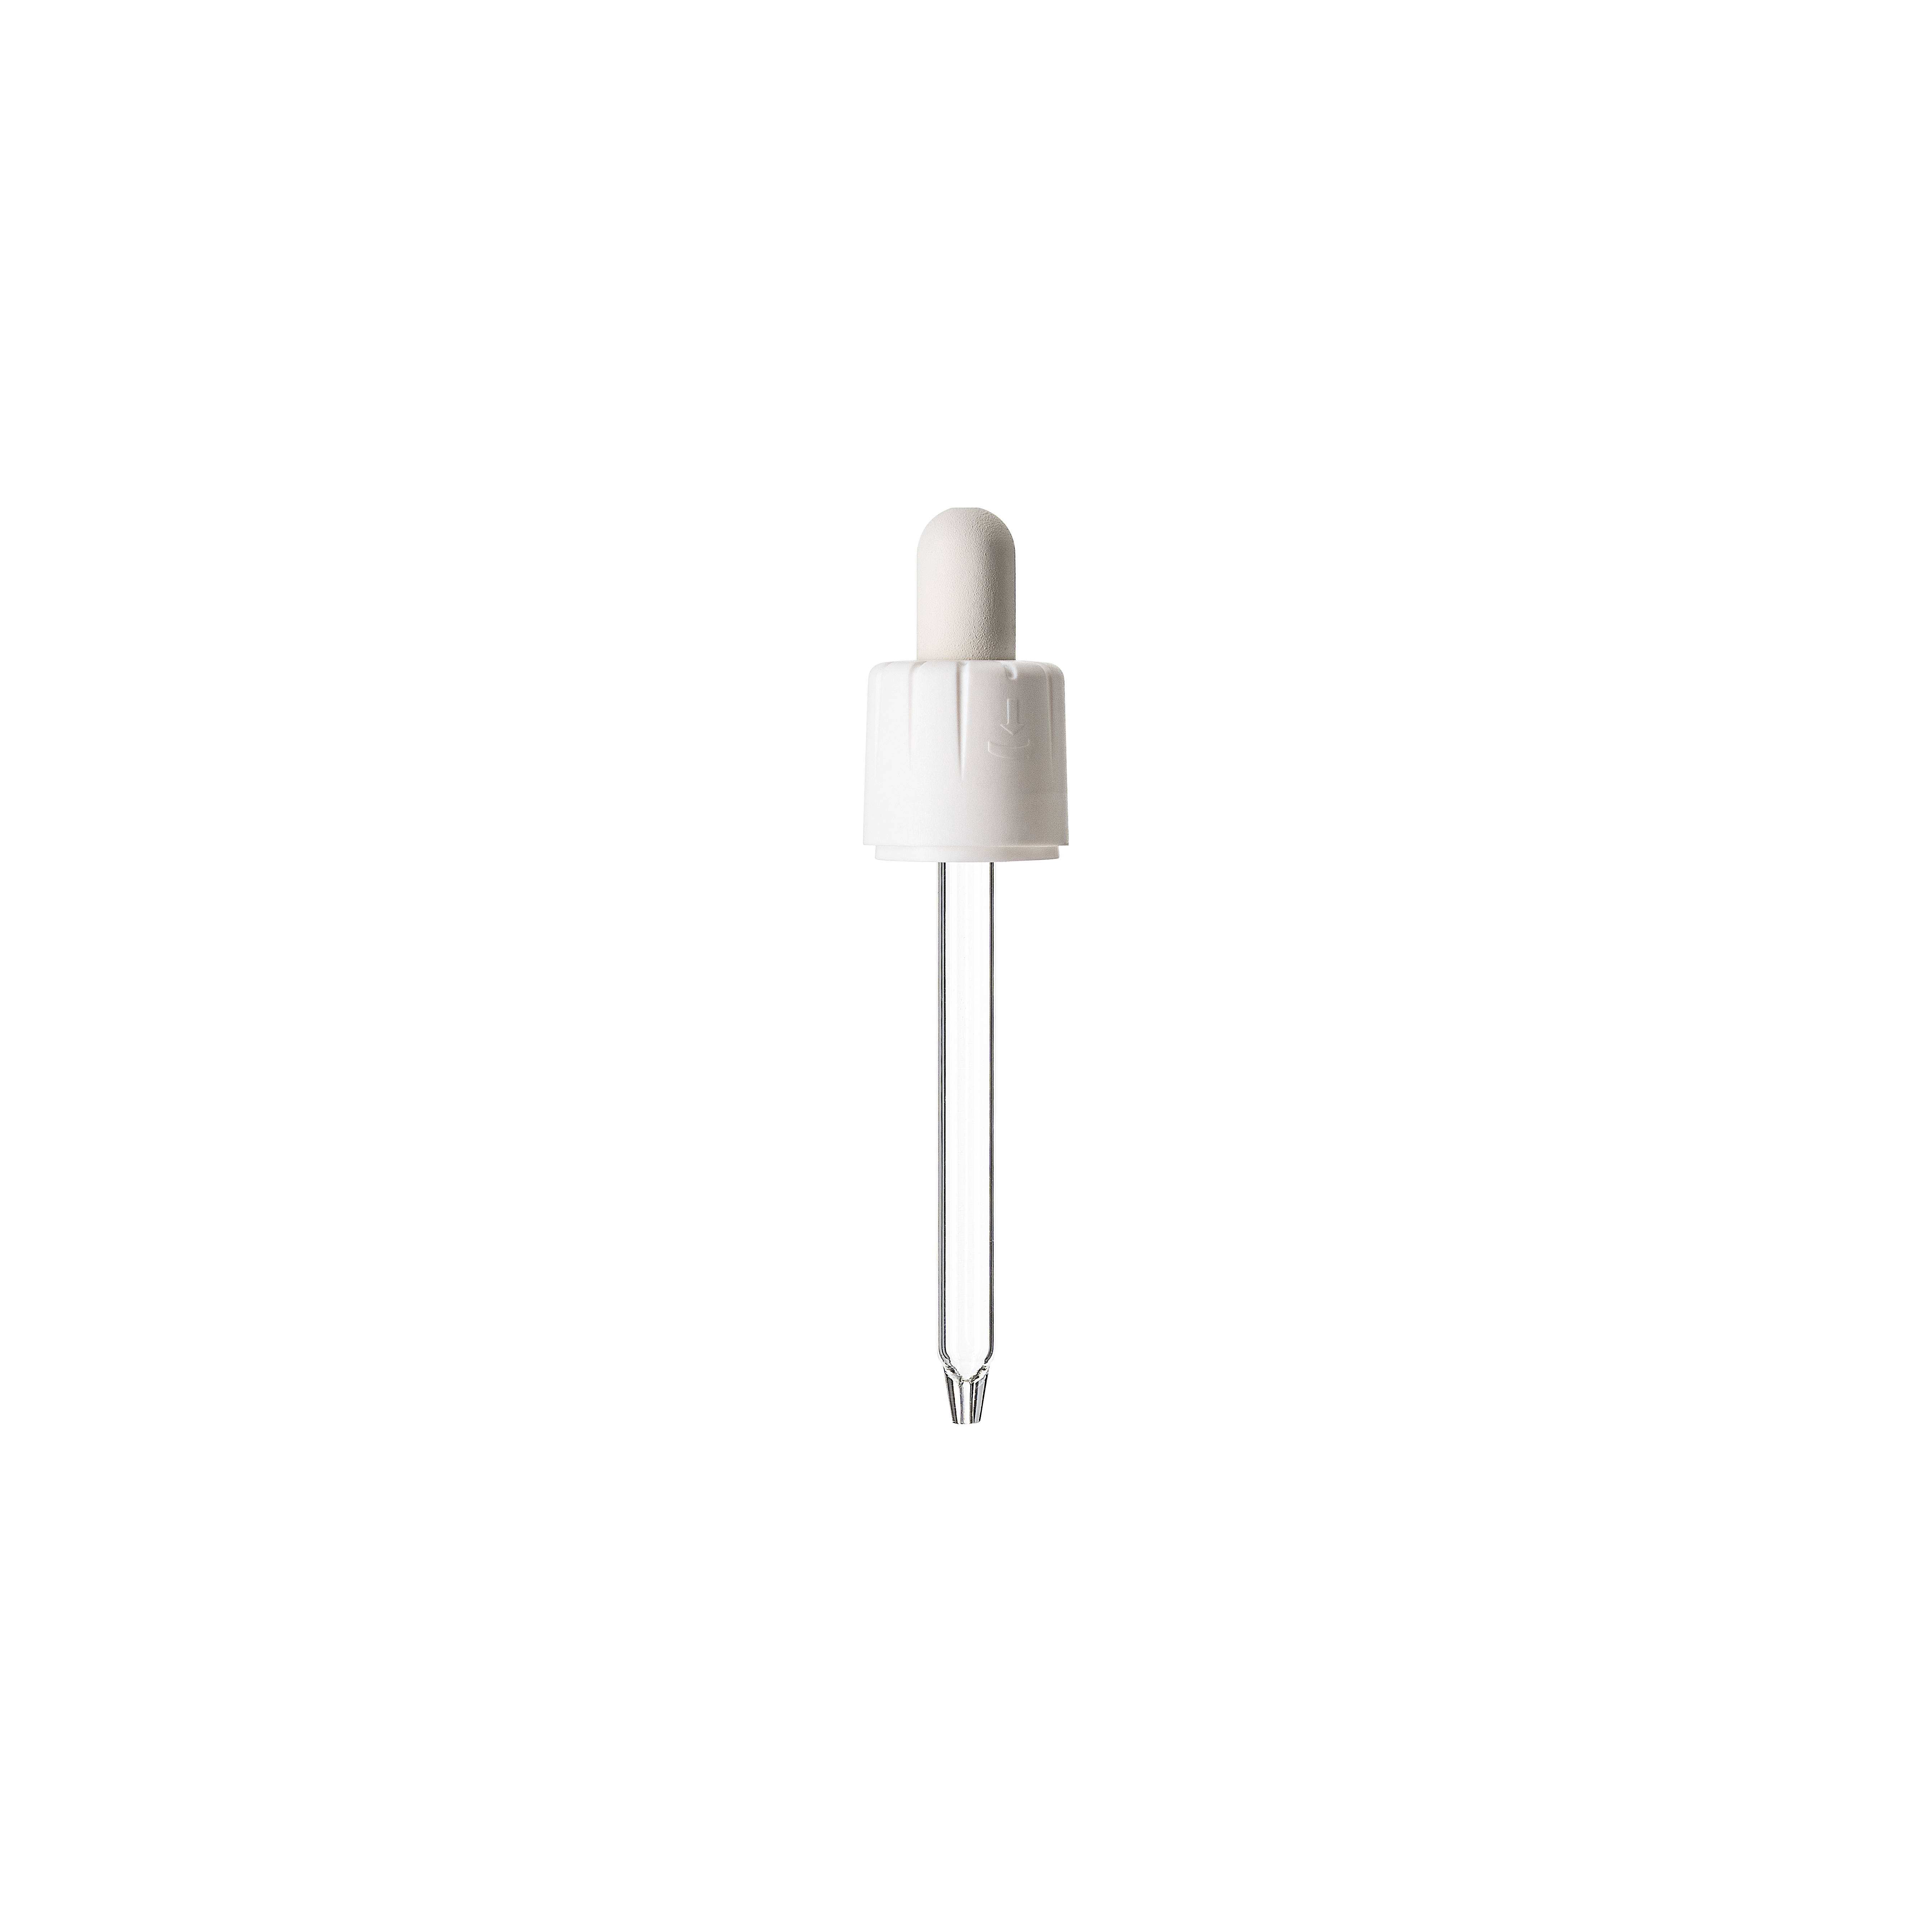 Child-resistant pipette series II, DIN18, tamper-evident, PP/PEHD, white, fine ribbed, white bulb NBR 1.0 ml, conical tip with 1.0 opening for Ginger 50 ml